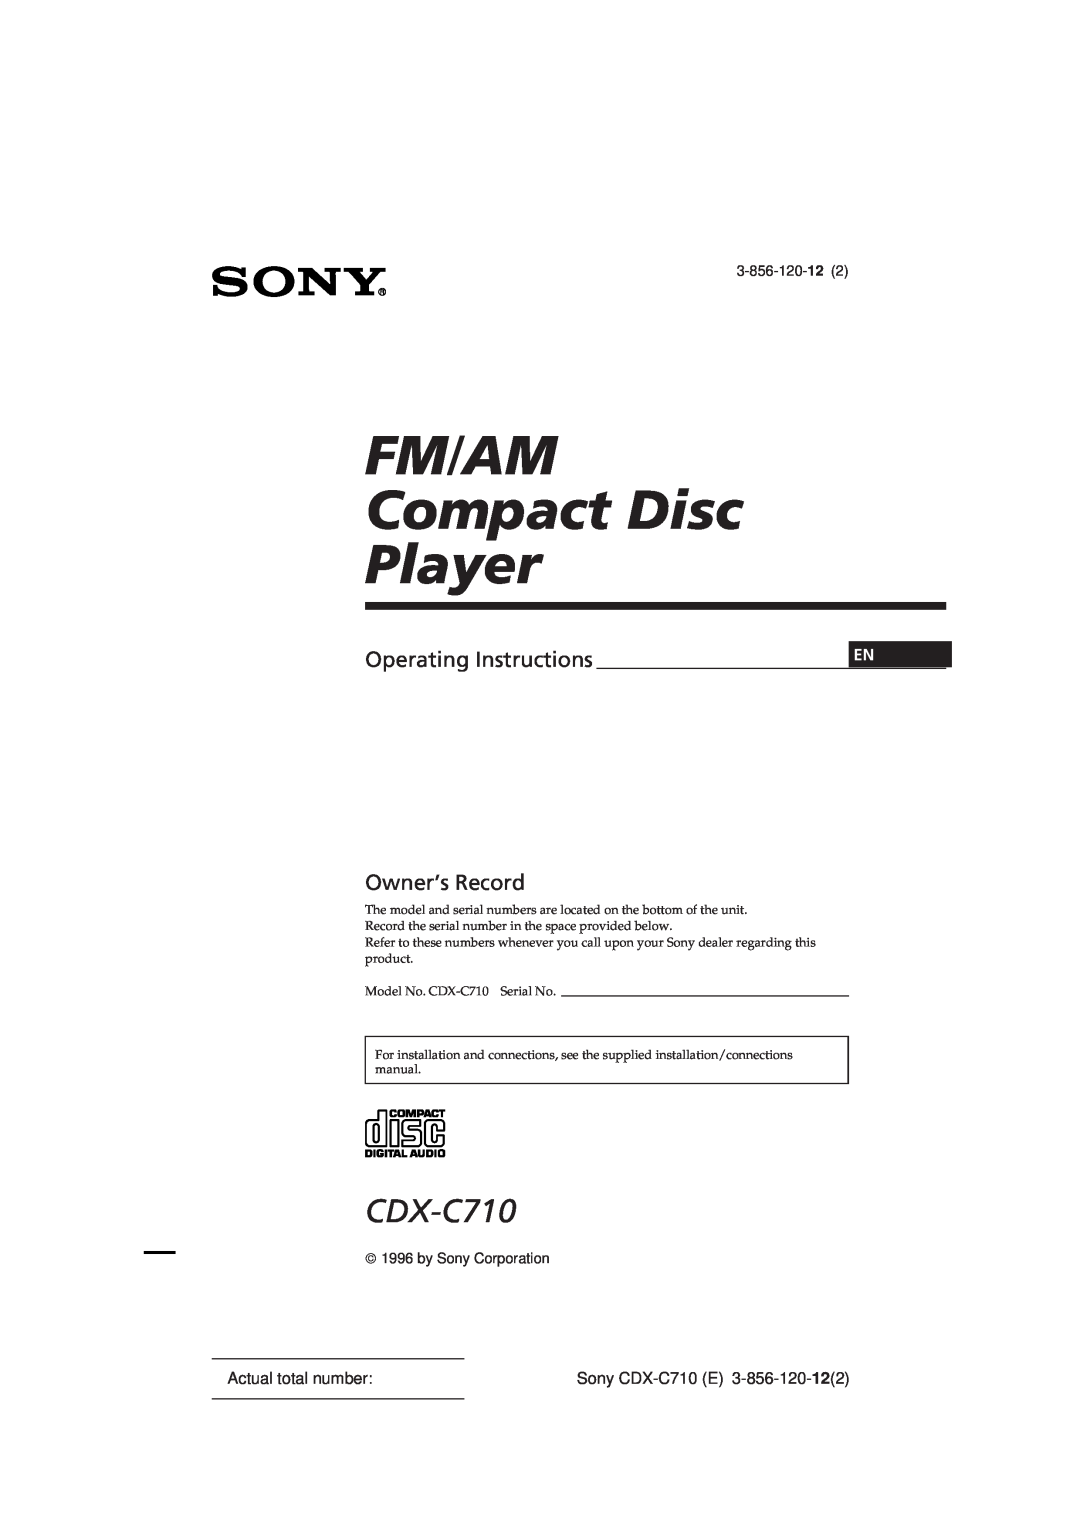 Sony CDX-C710 manual FM/AM Compact Disc Player, Operating Instructions, Owner’s Record, Actual total number, 3-856-120-12 